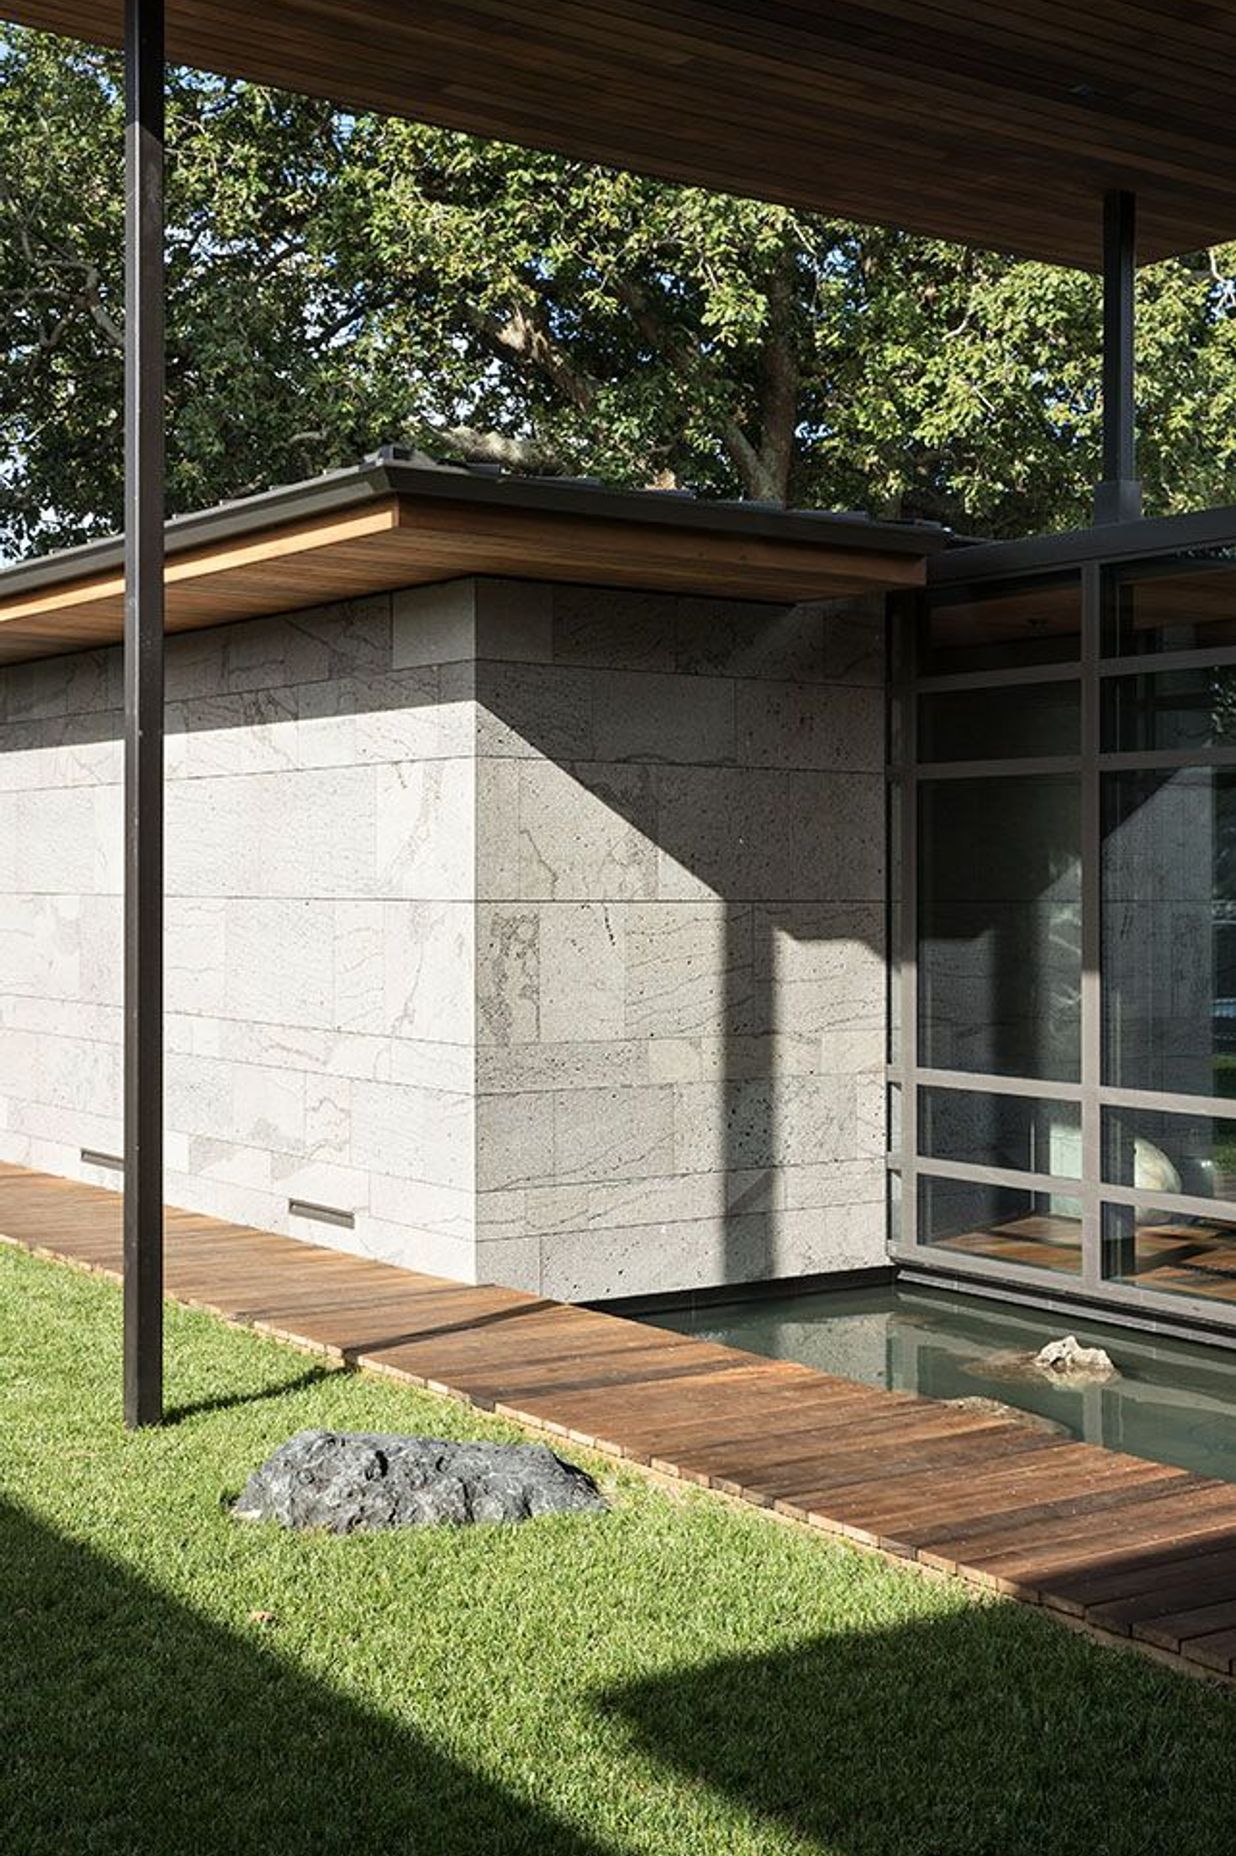 Inspired by Japanese architecture, reflection ponds and strategically placed stones create features in the micro-landscapes that surround Volcano House.